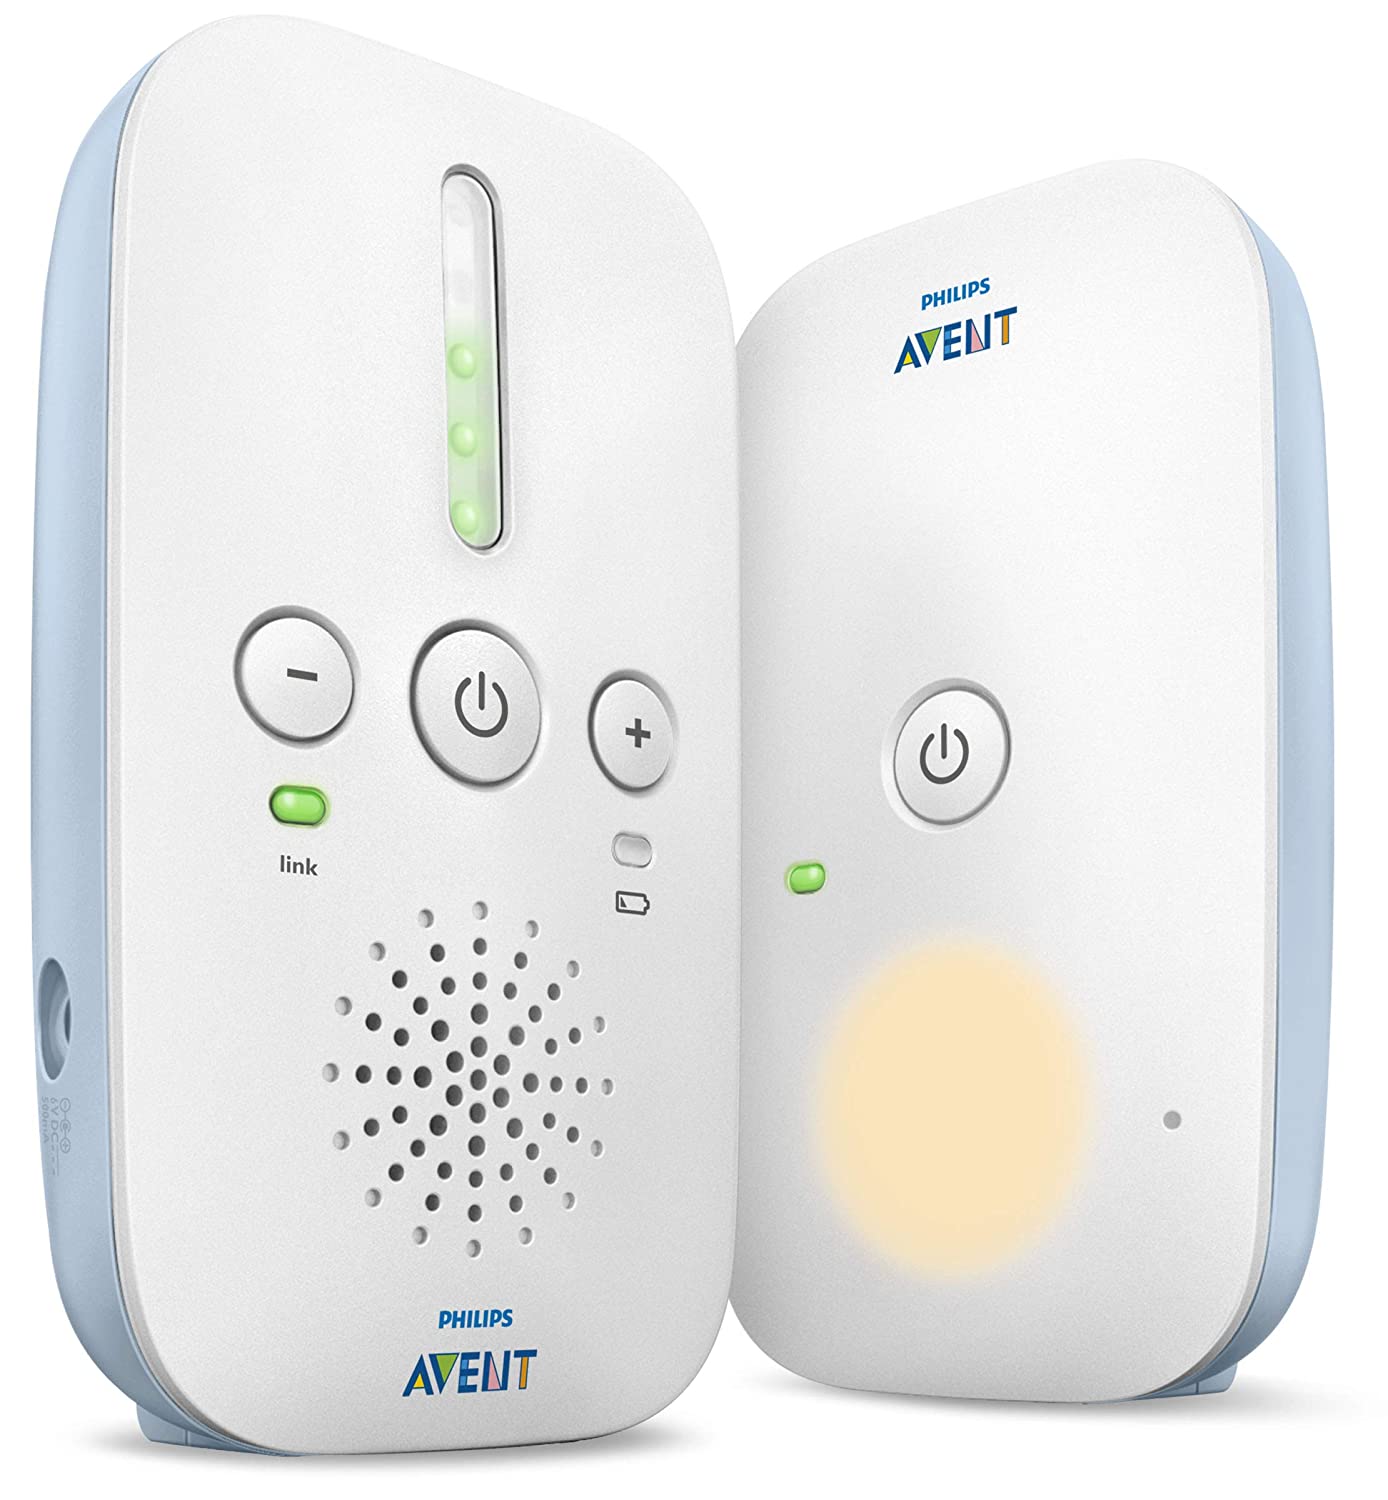 Philips Avent Audio Baby Monitor and Gift Set